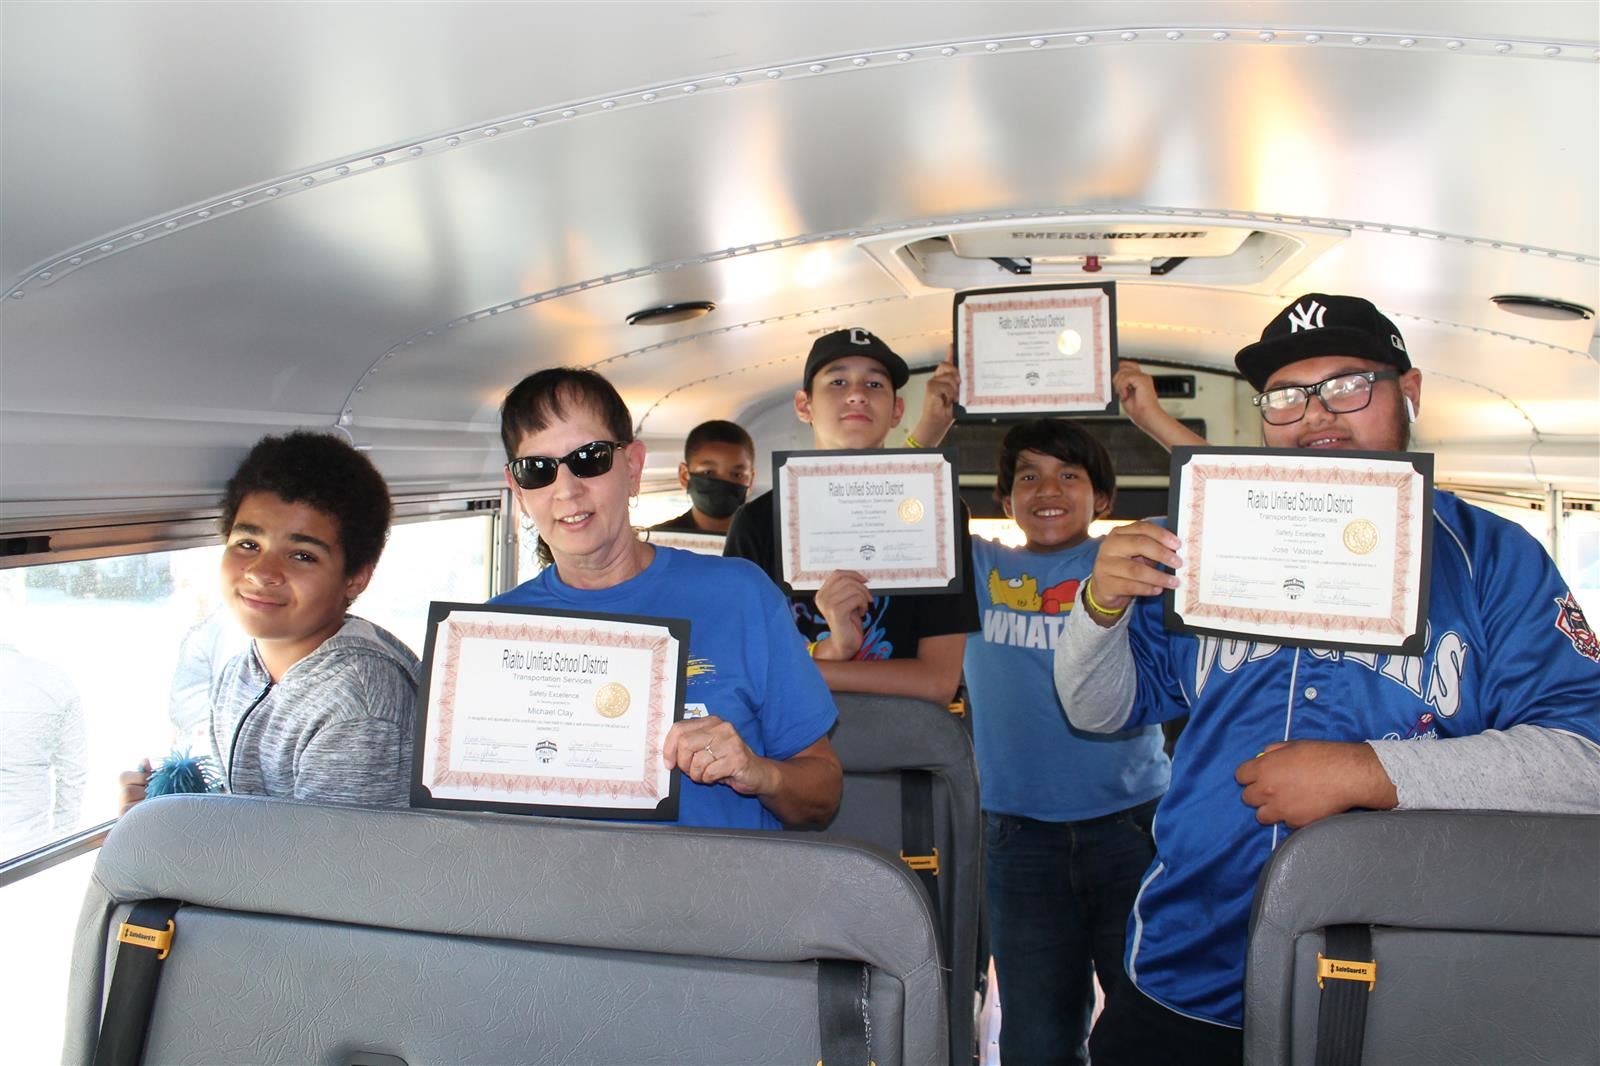 Bus Riders of the month